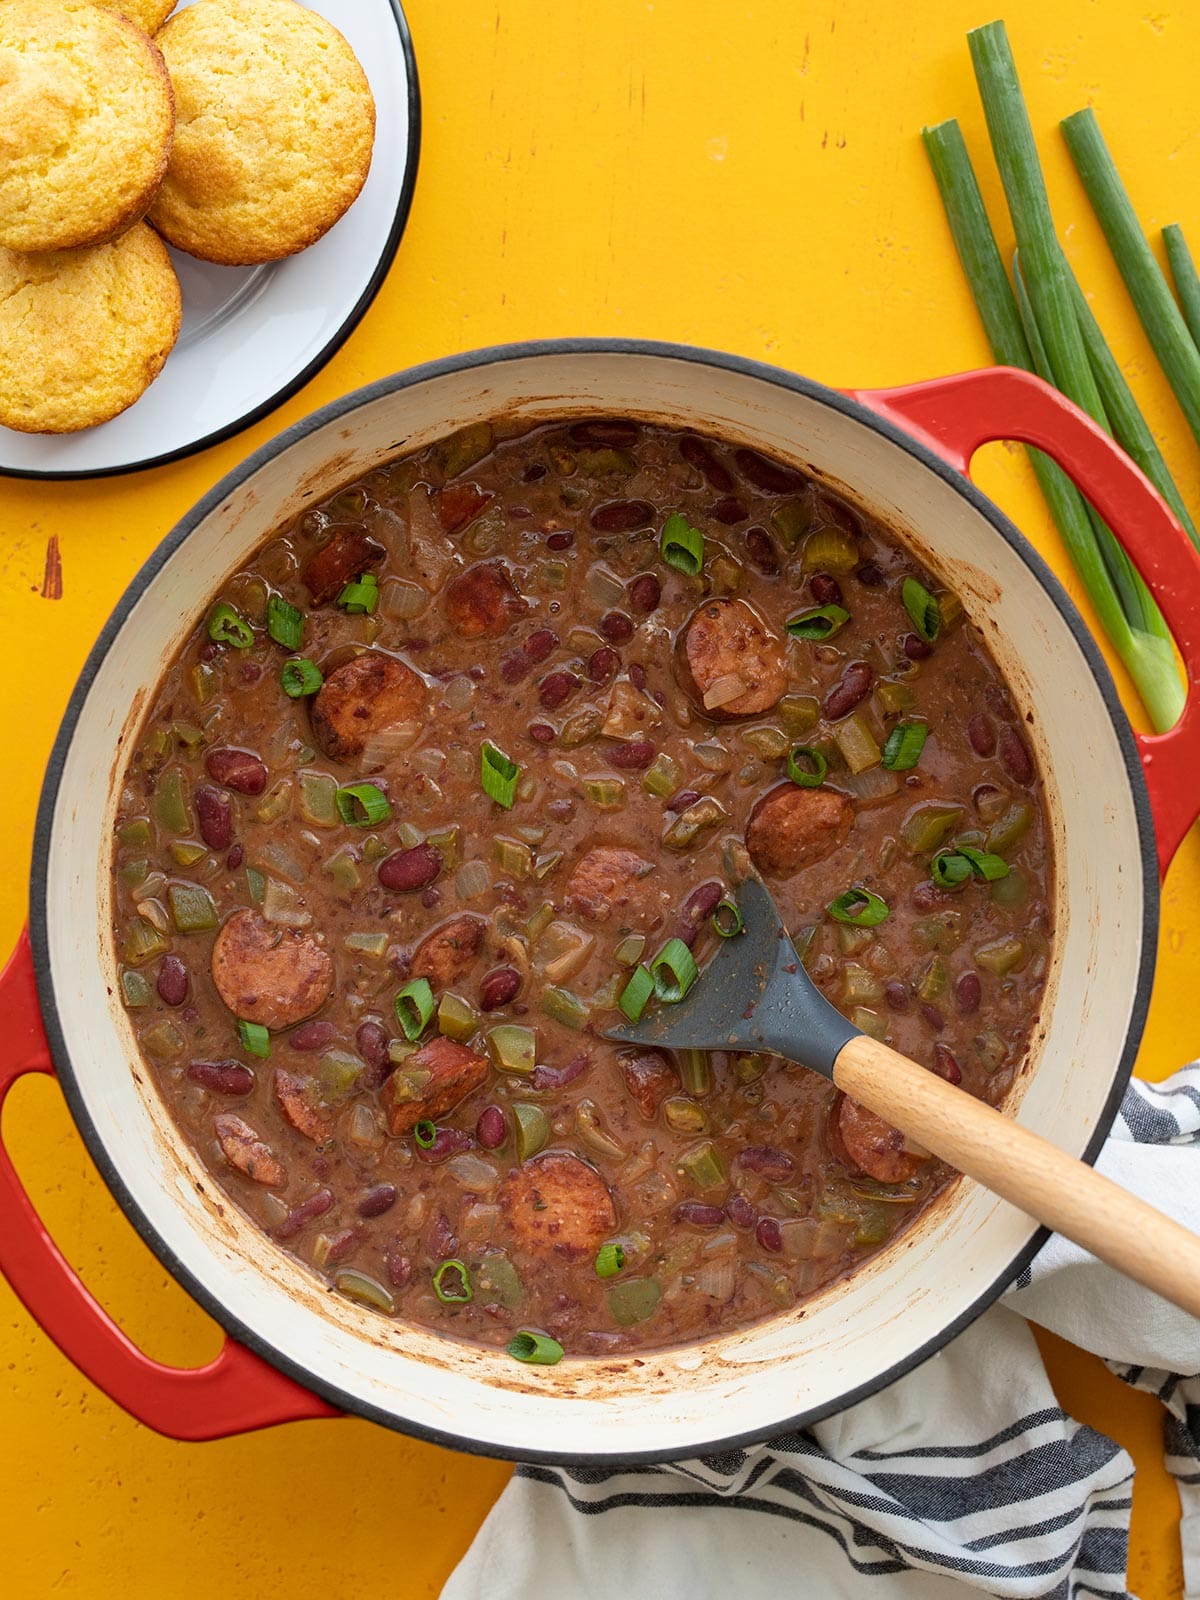 Overhead view of a pot of red beans with sausage, corn muffins on the side